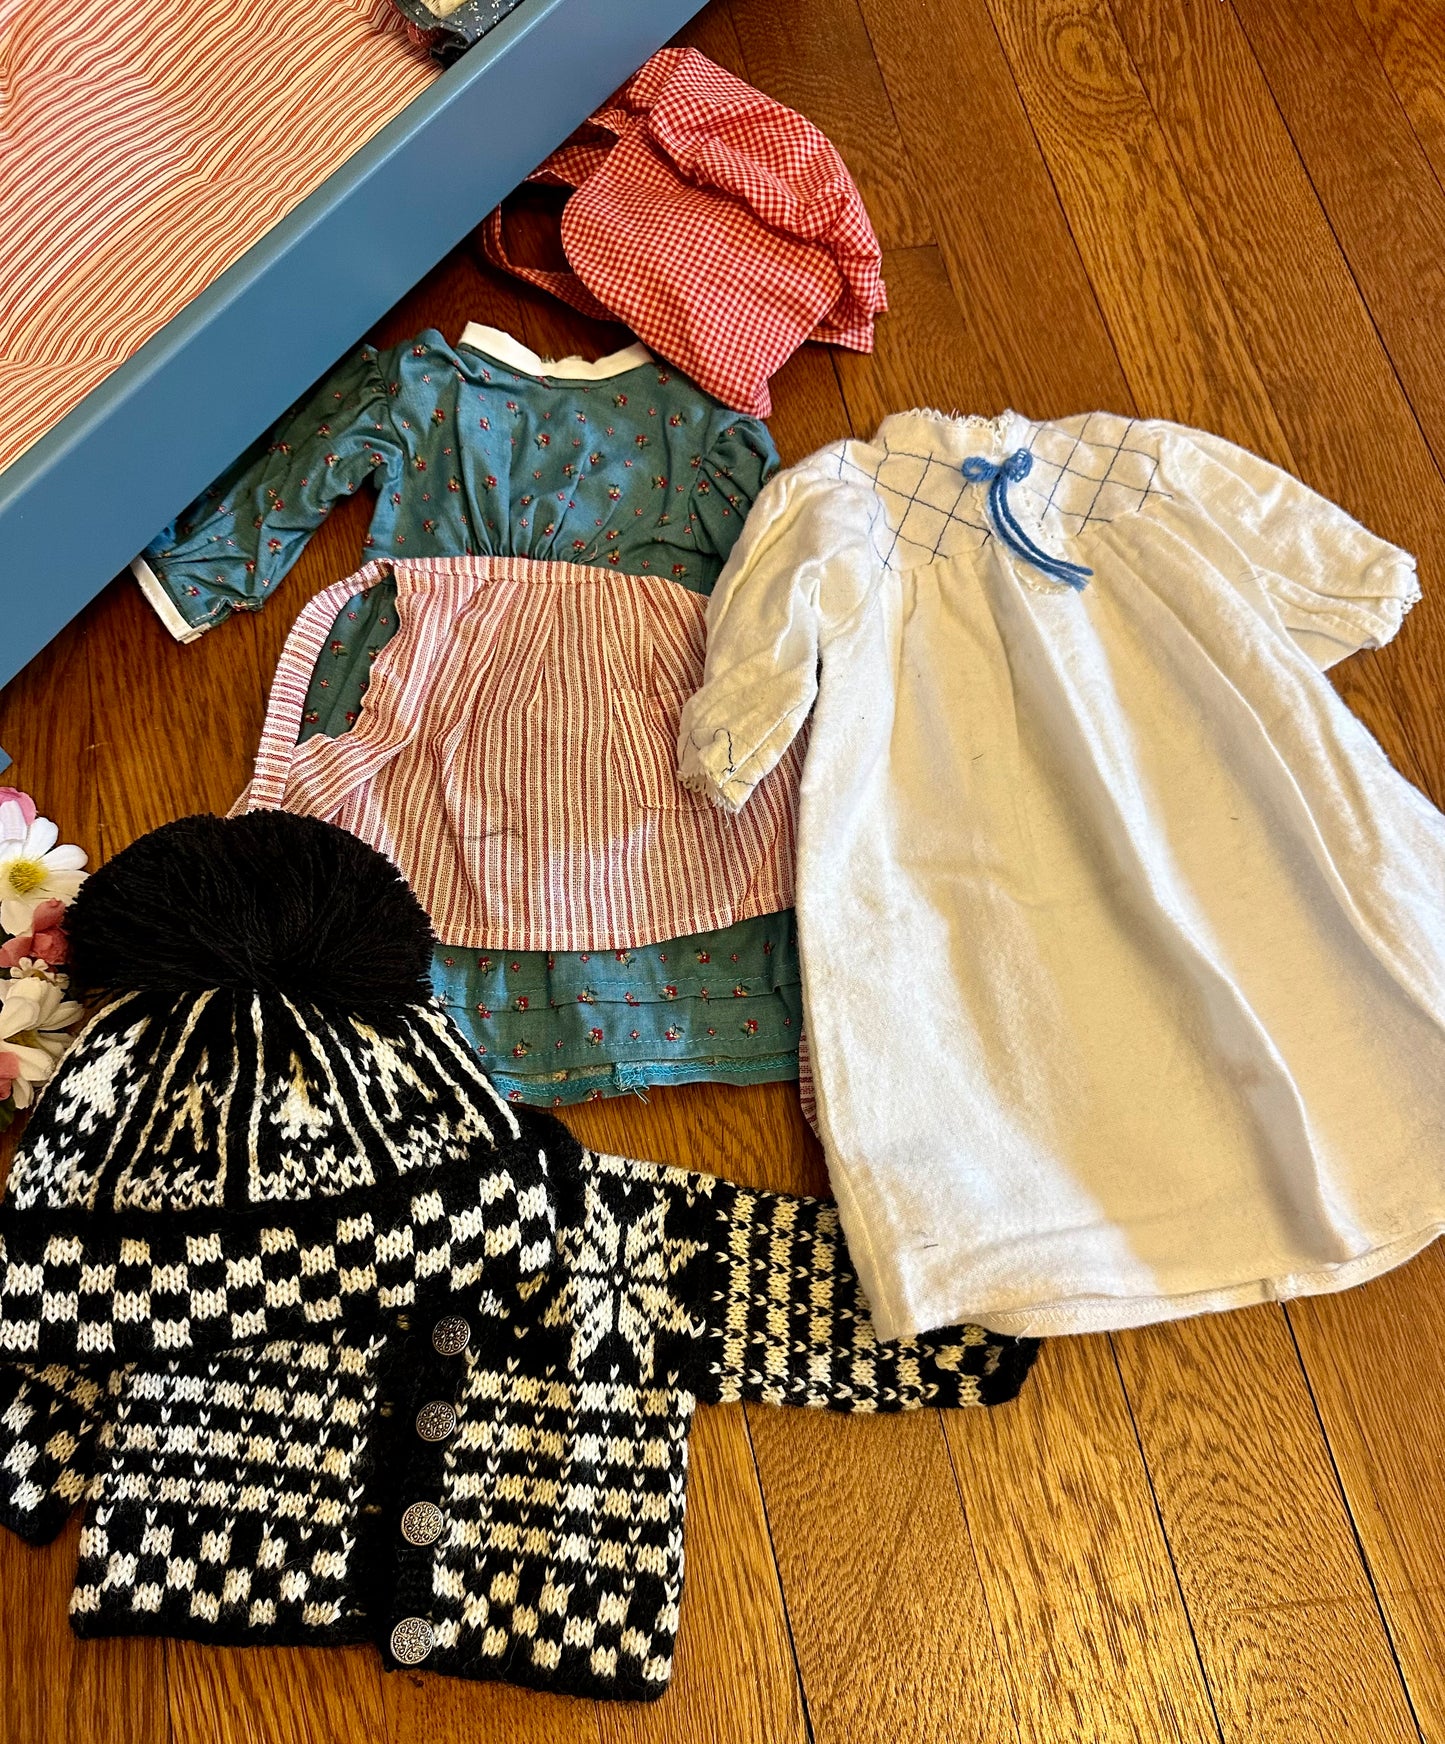 American Girl Doll Kirsten + Bed + Clothing + Accessories